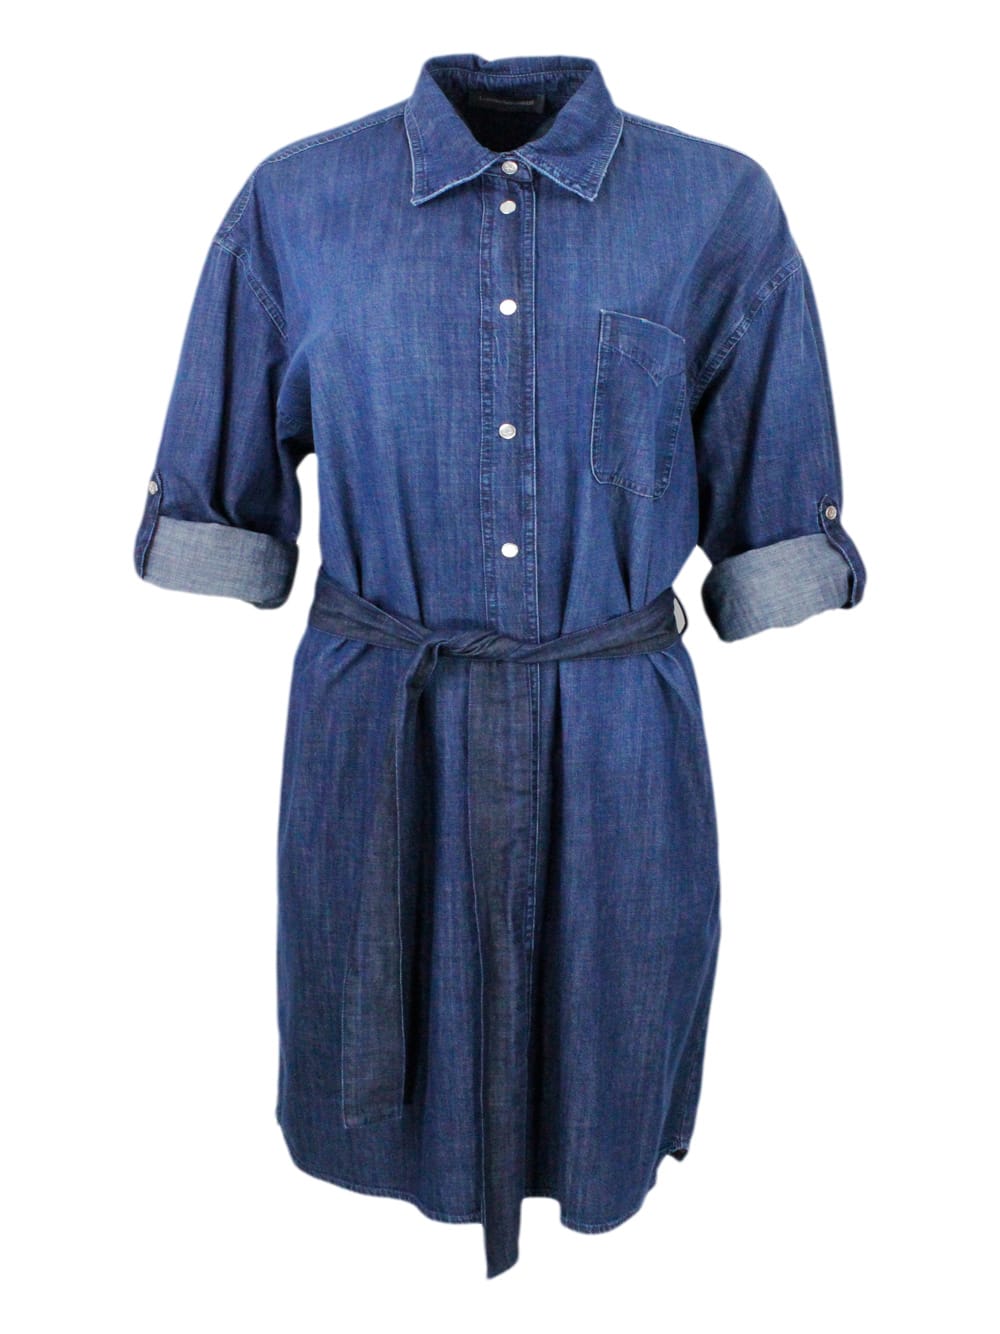 Shop Lorena Antoniazzi Shirt Dress In Light Chambray Denim Cotton With Long Sleeves With Button Closure And Belt At The Wai